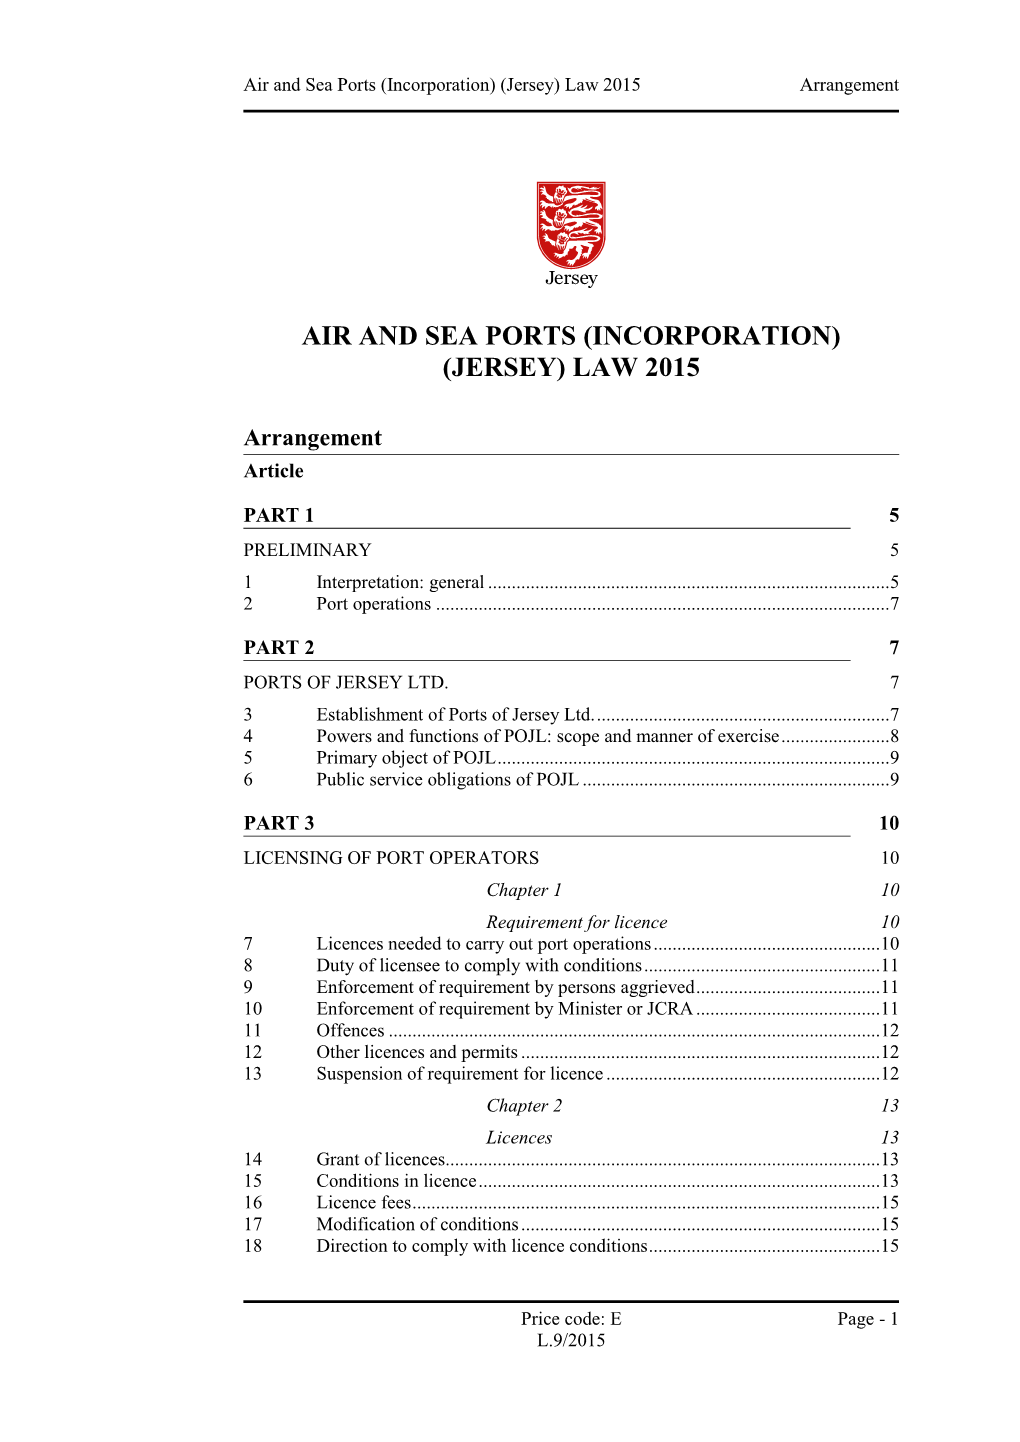 Air and Sea Ports (Incorporation) (Jersey) Law 2015 Arrangement